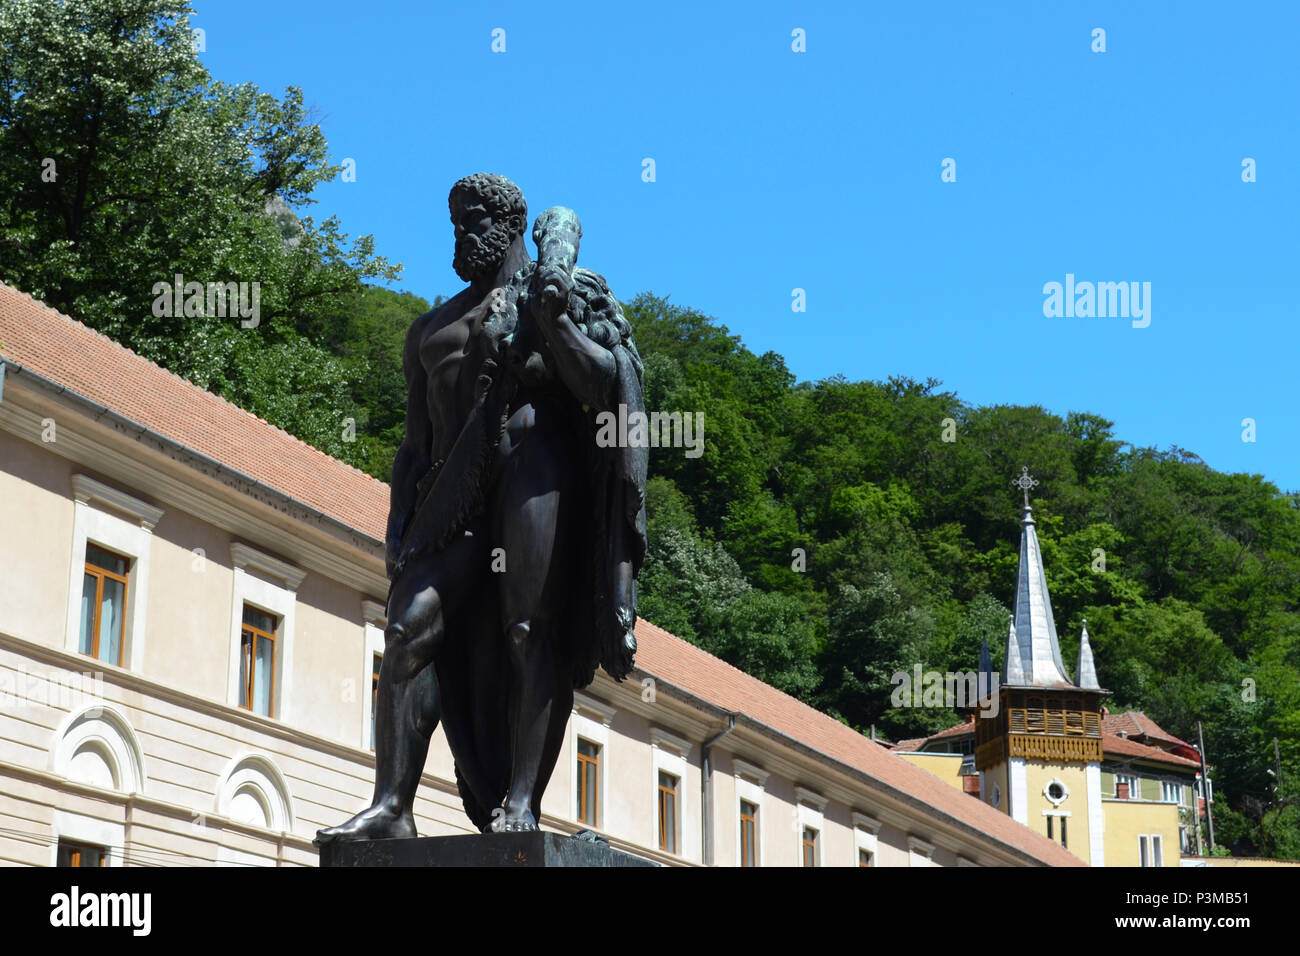 Close-up of the famous statue in the center of Băile Herculane resort in Caraș Severin county, Romania Stock Photo